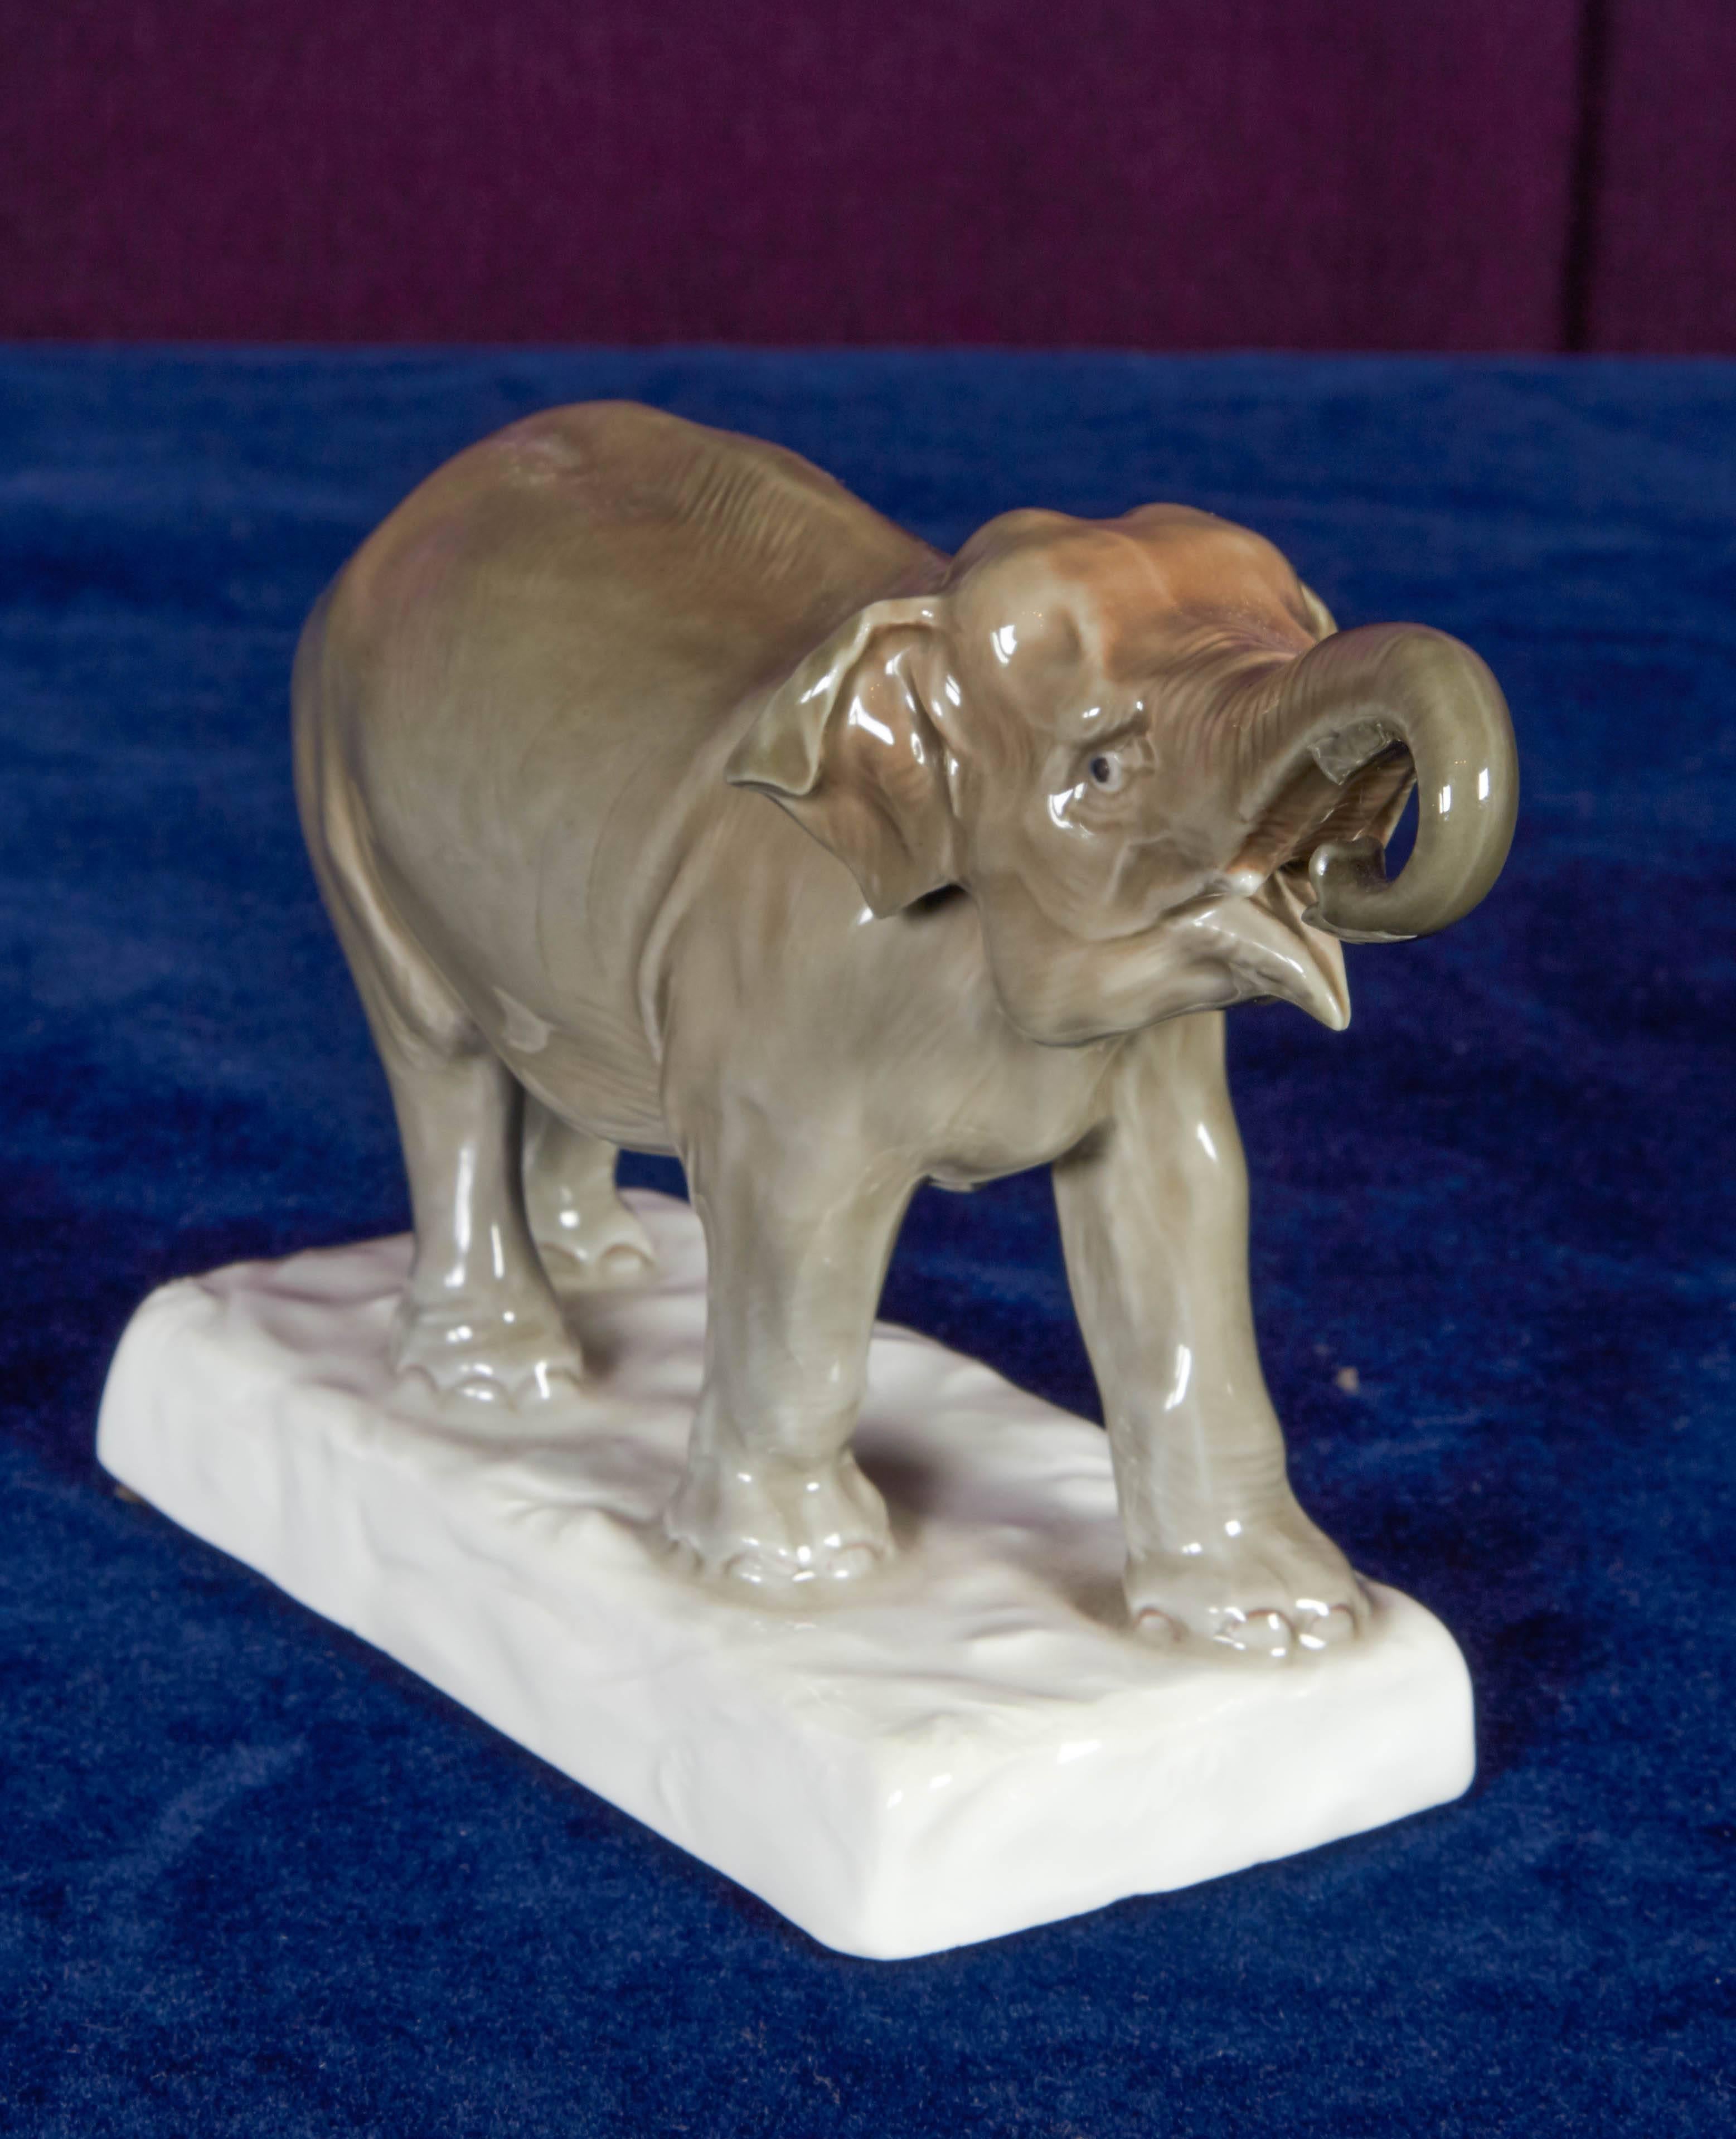 A meticulously handcrafted and hand-painted Meissen porcelain figure of an elephant. Crafted with the finest details, the artist paid exceptional attention to the most minute wrinkles with his use of brushstrokes and blending of greys and browns. A